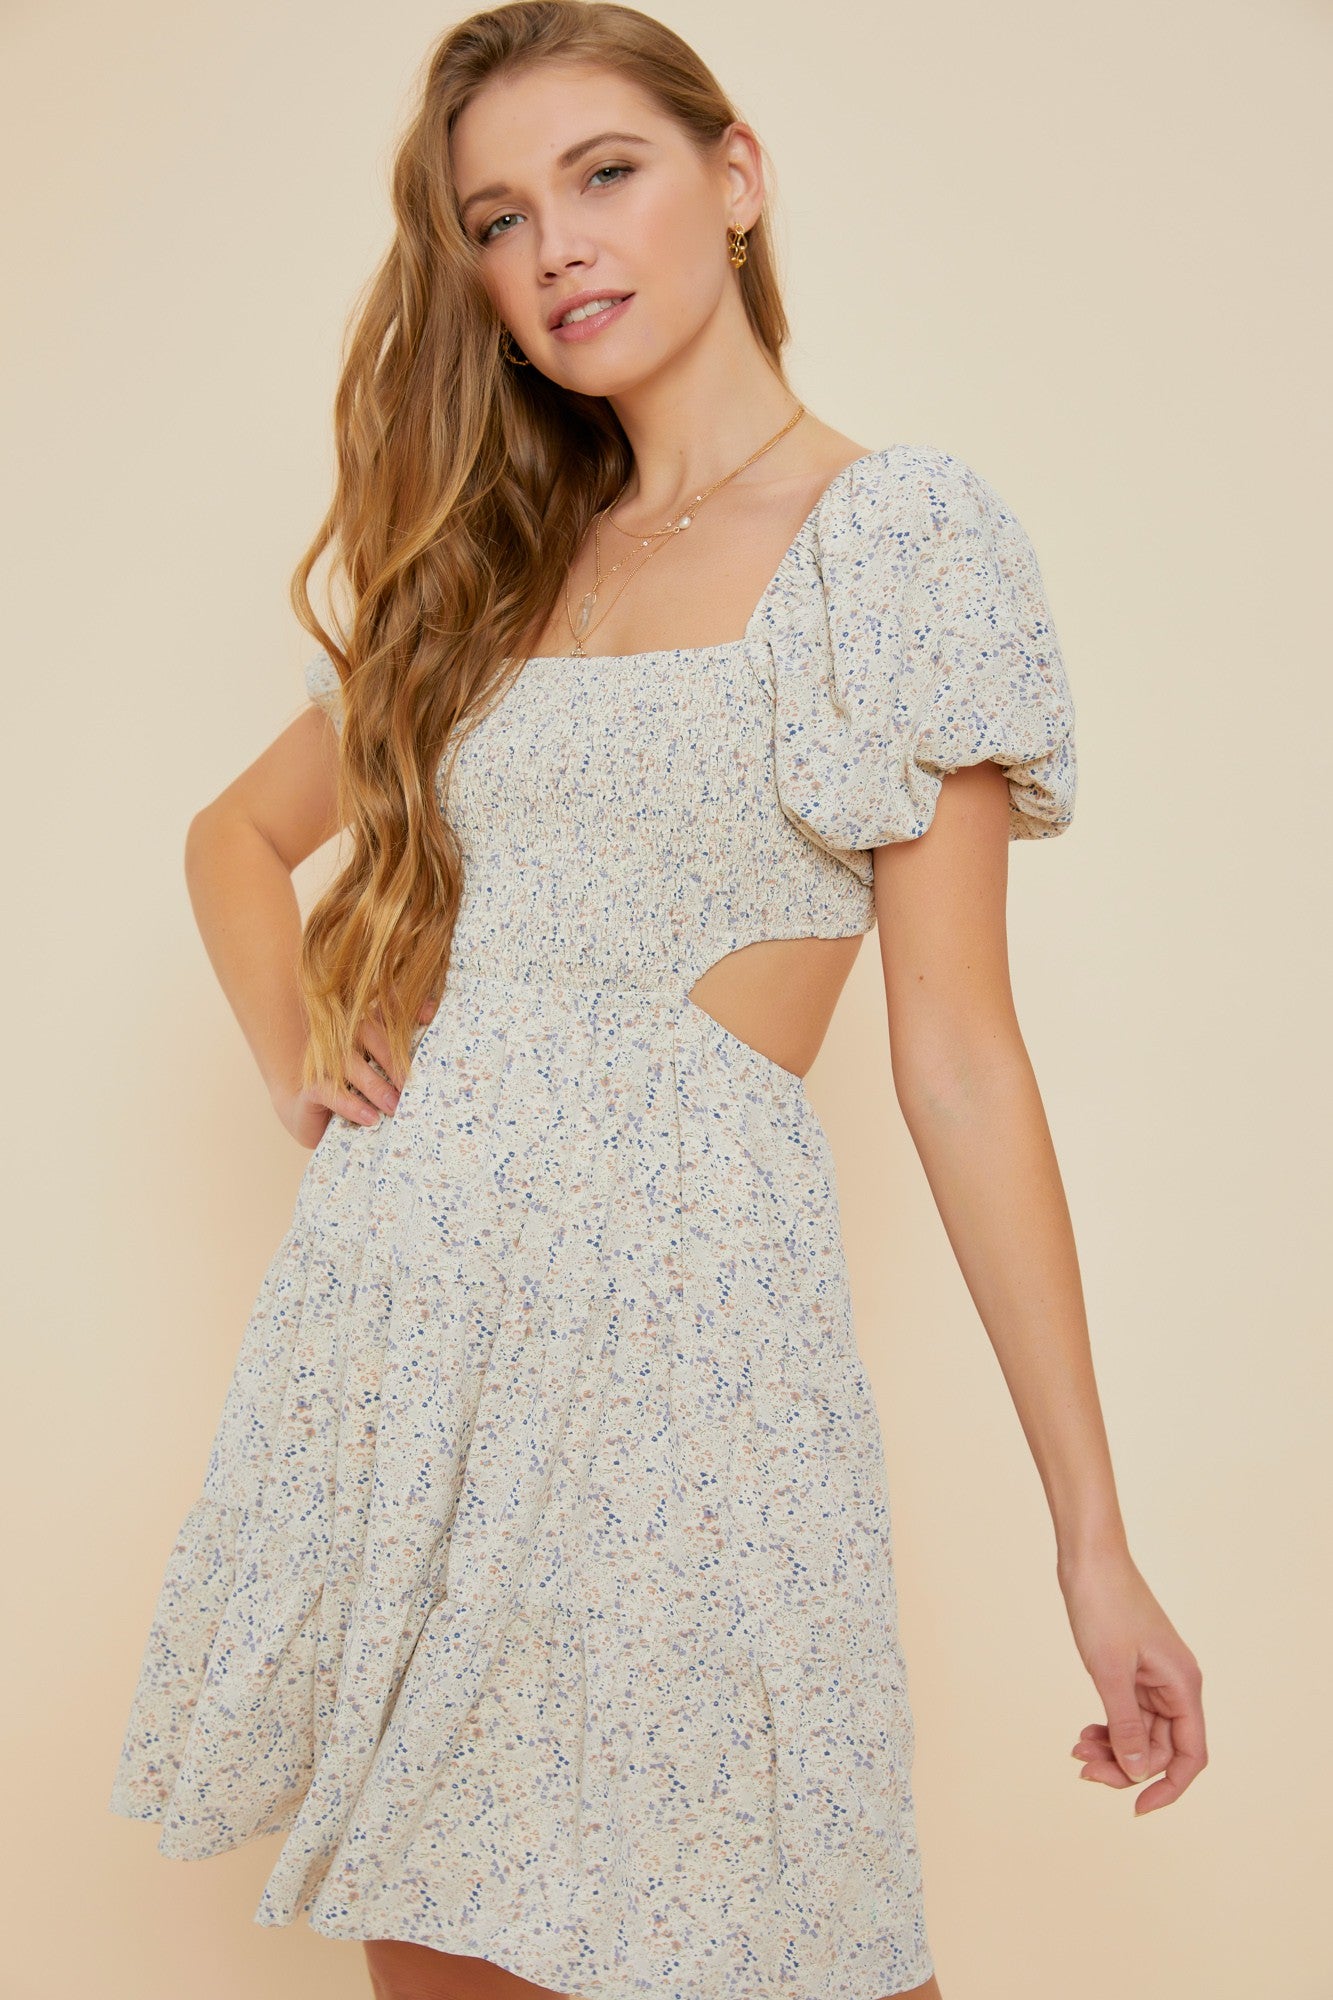 Floral dress with cut-out